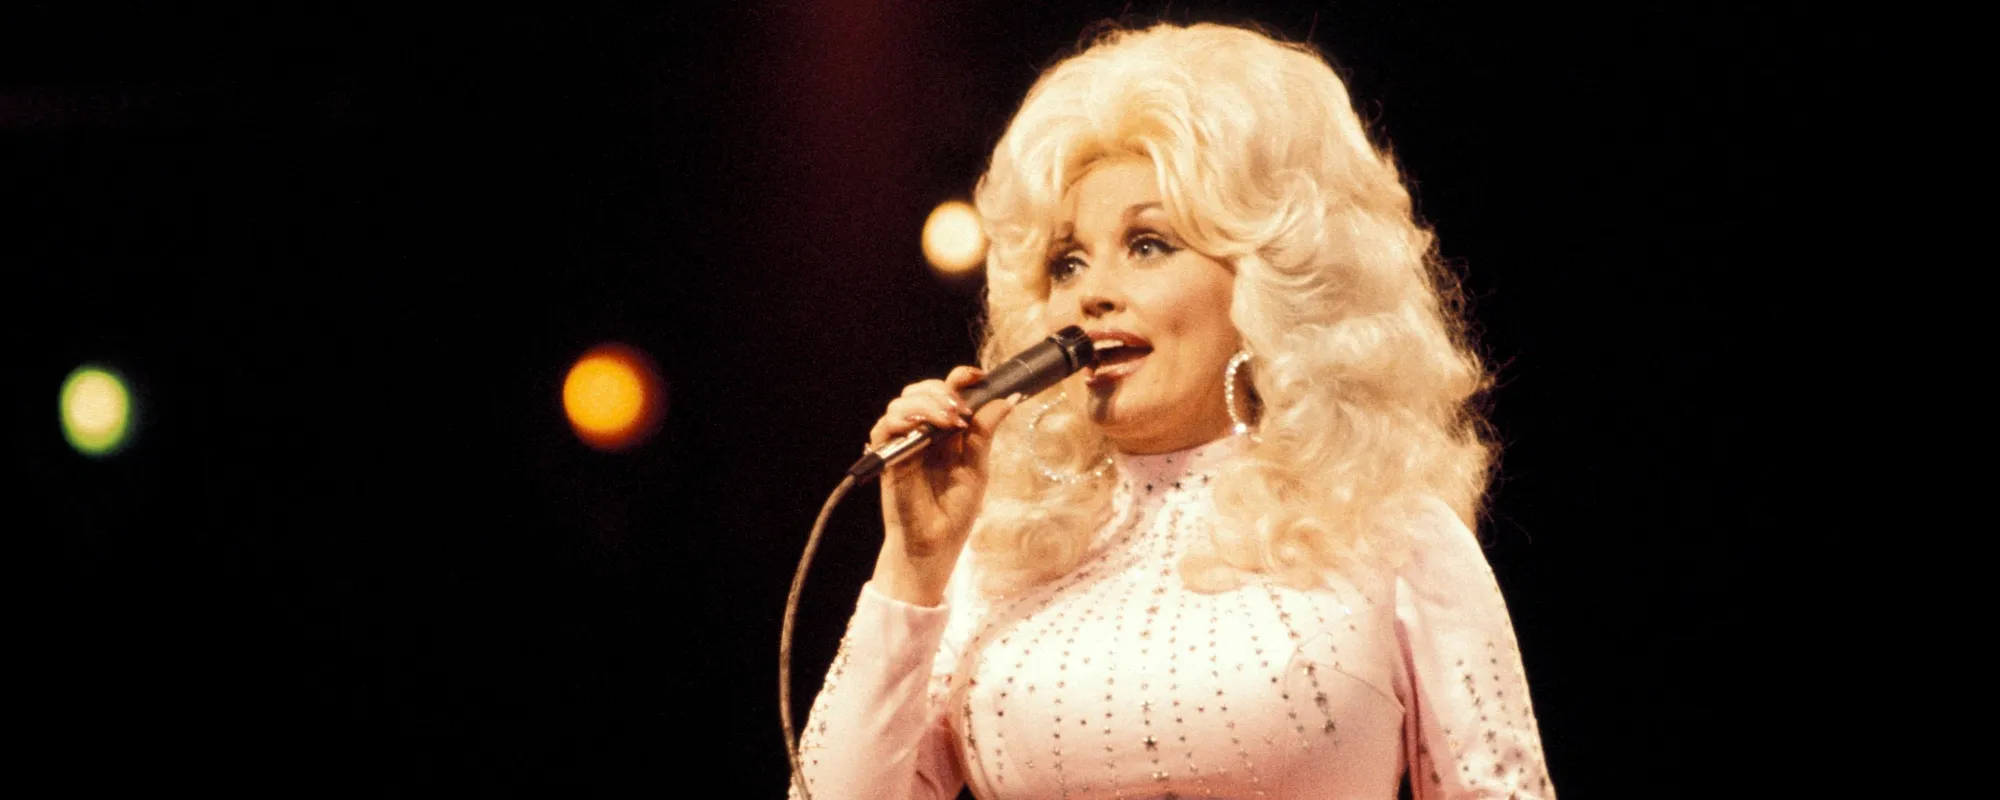 Dolly Parton Reveals the Reason She Never Let Elvis Presley Record “I Will Always Love You”